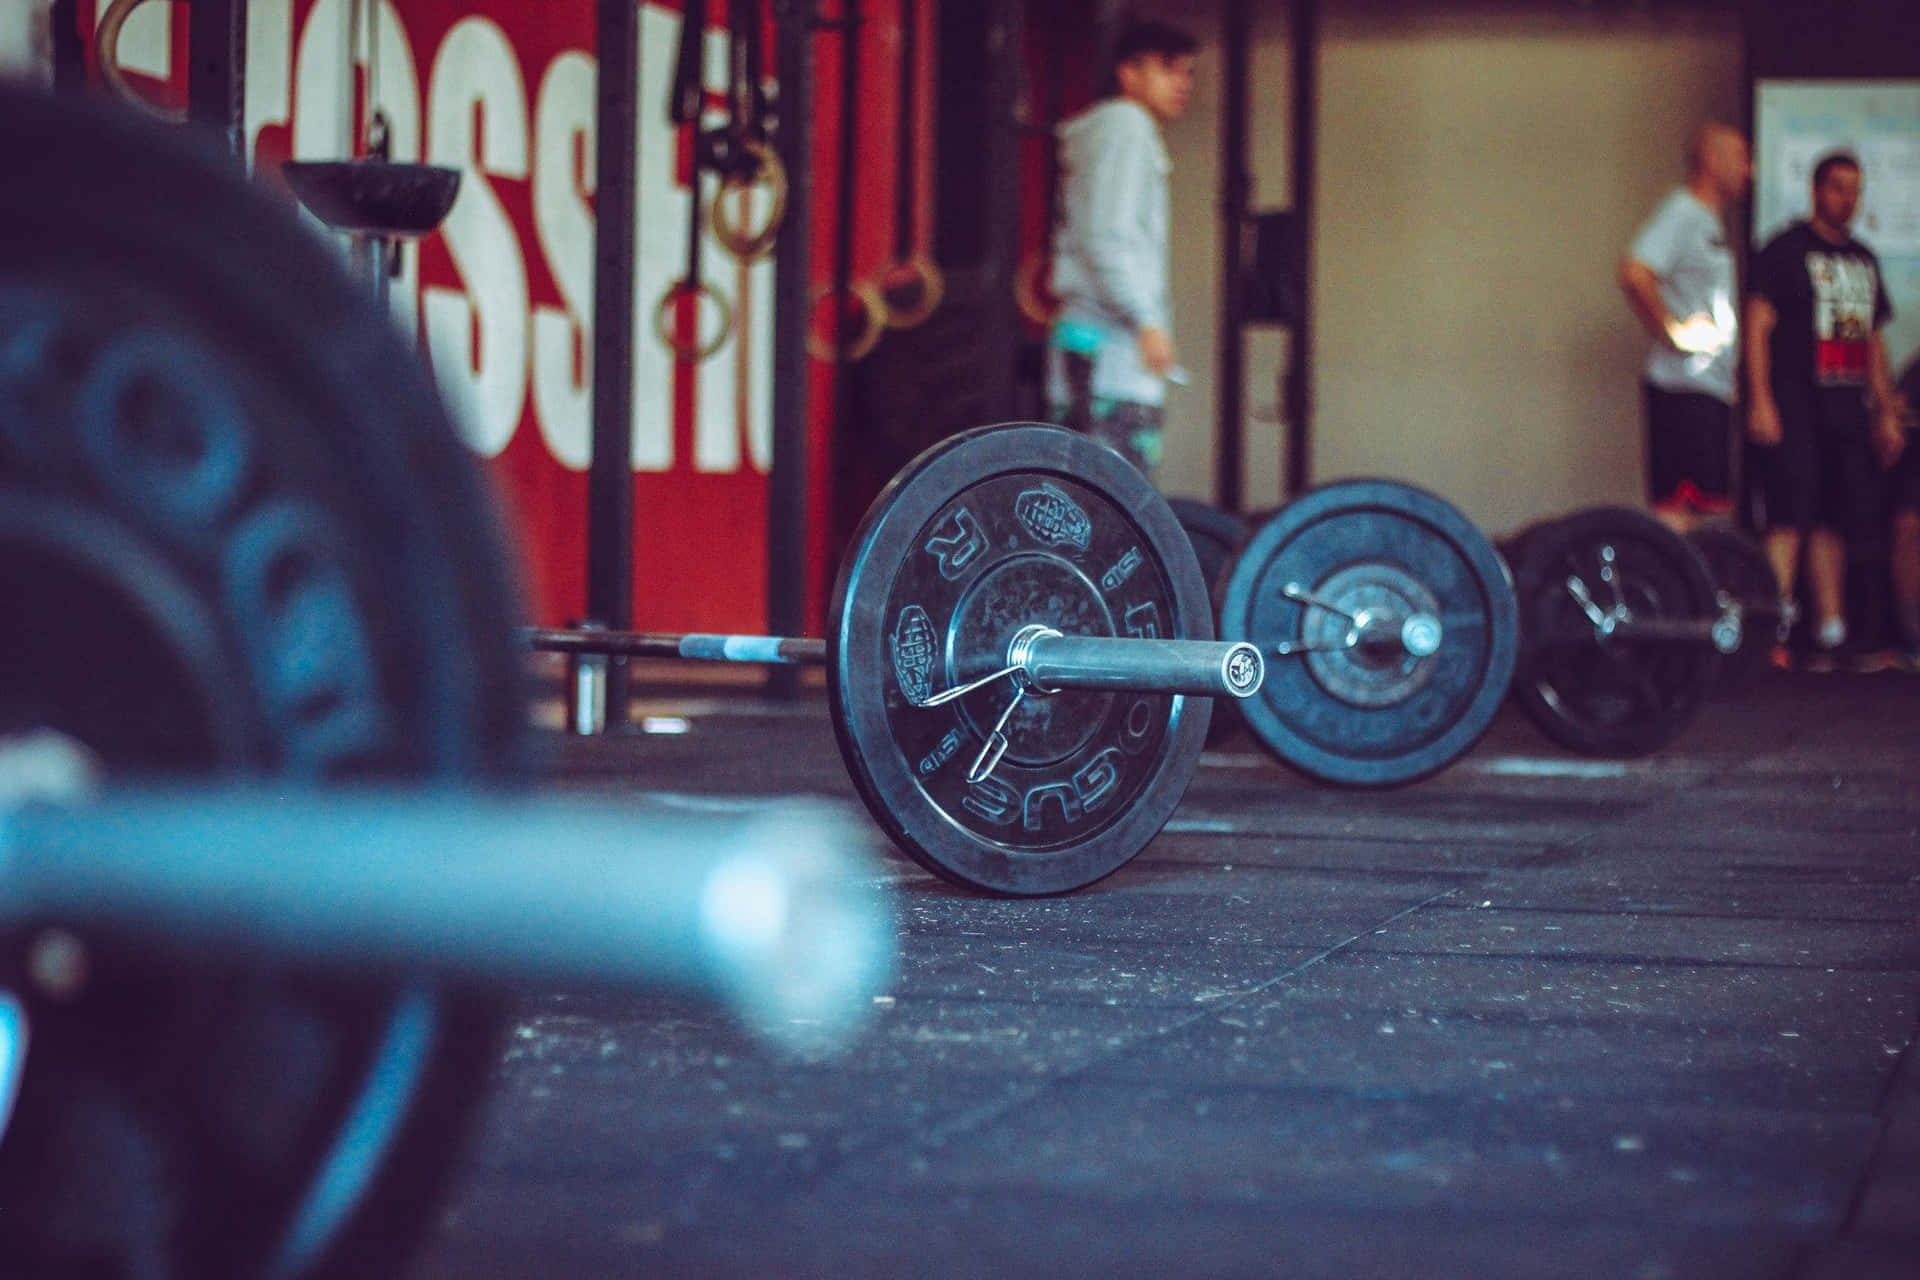 Get Strong with Barbell lifts